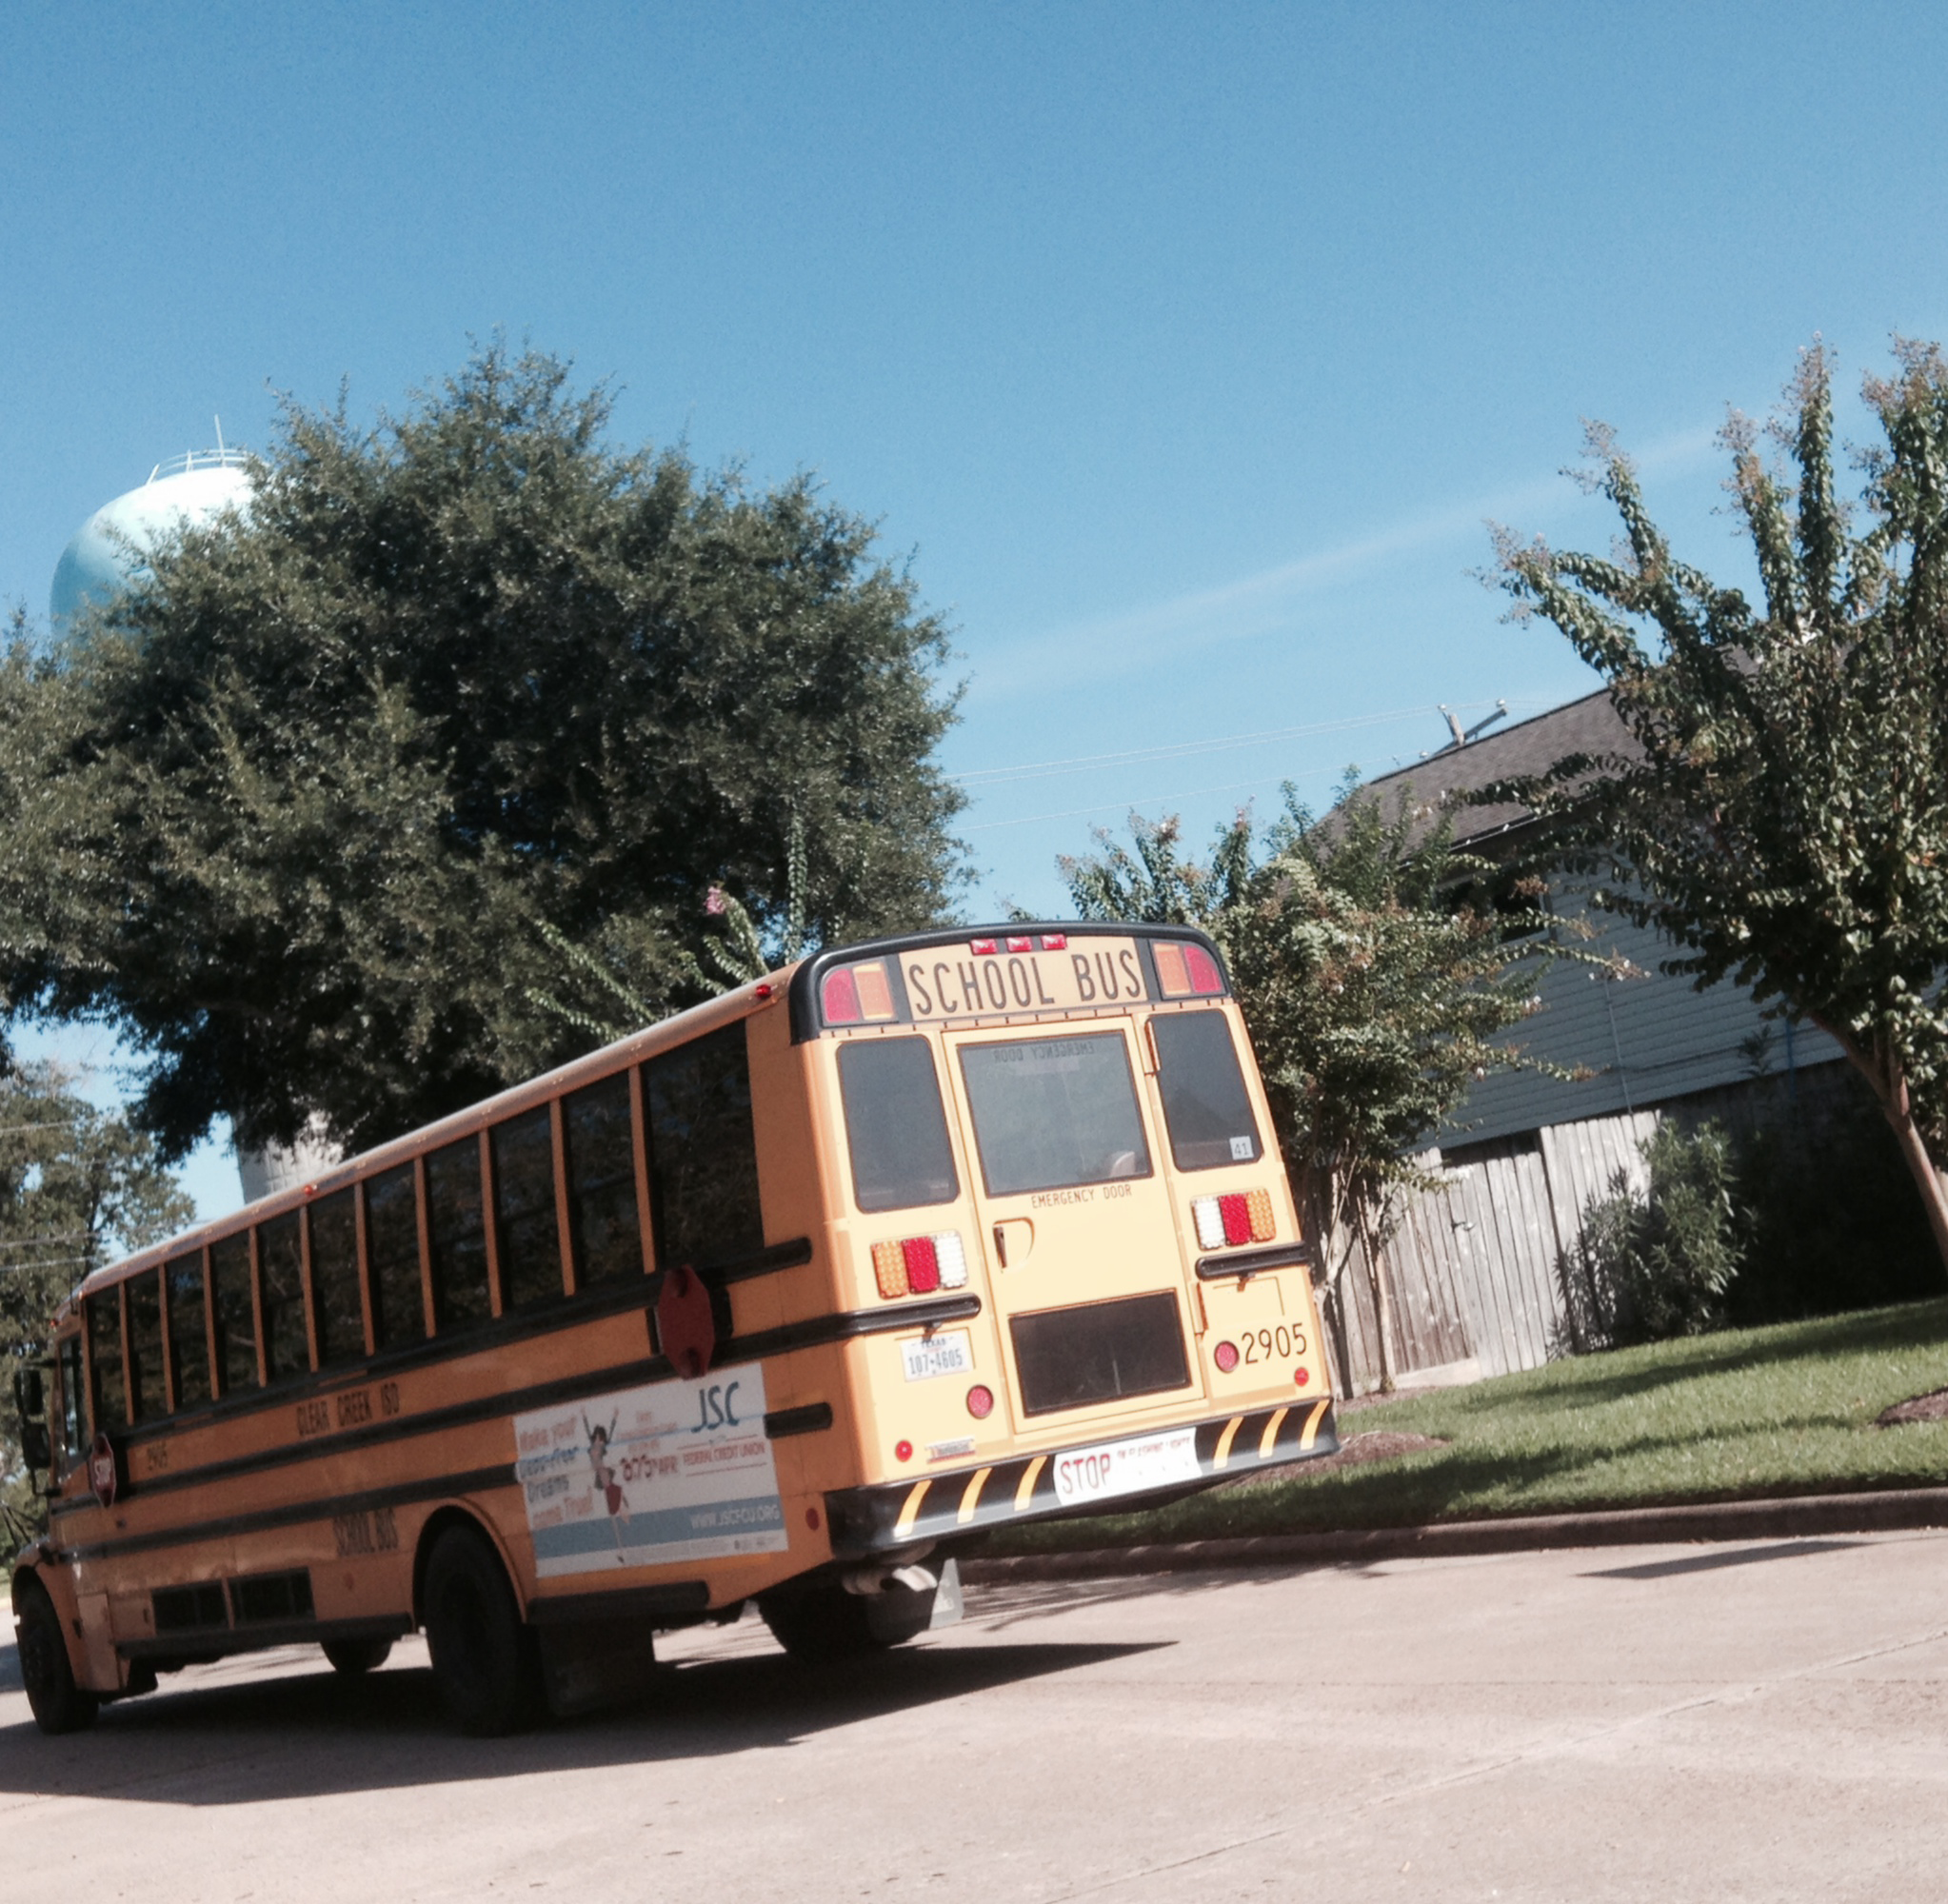 School buses may be a thing of the past. Slideshow created by The Signal reporter Jacki Fries.